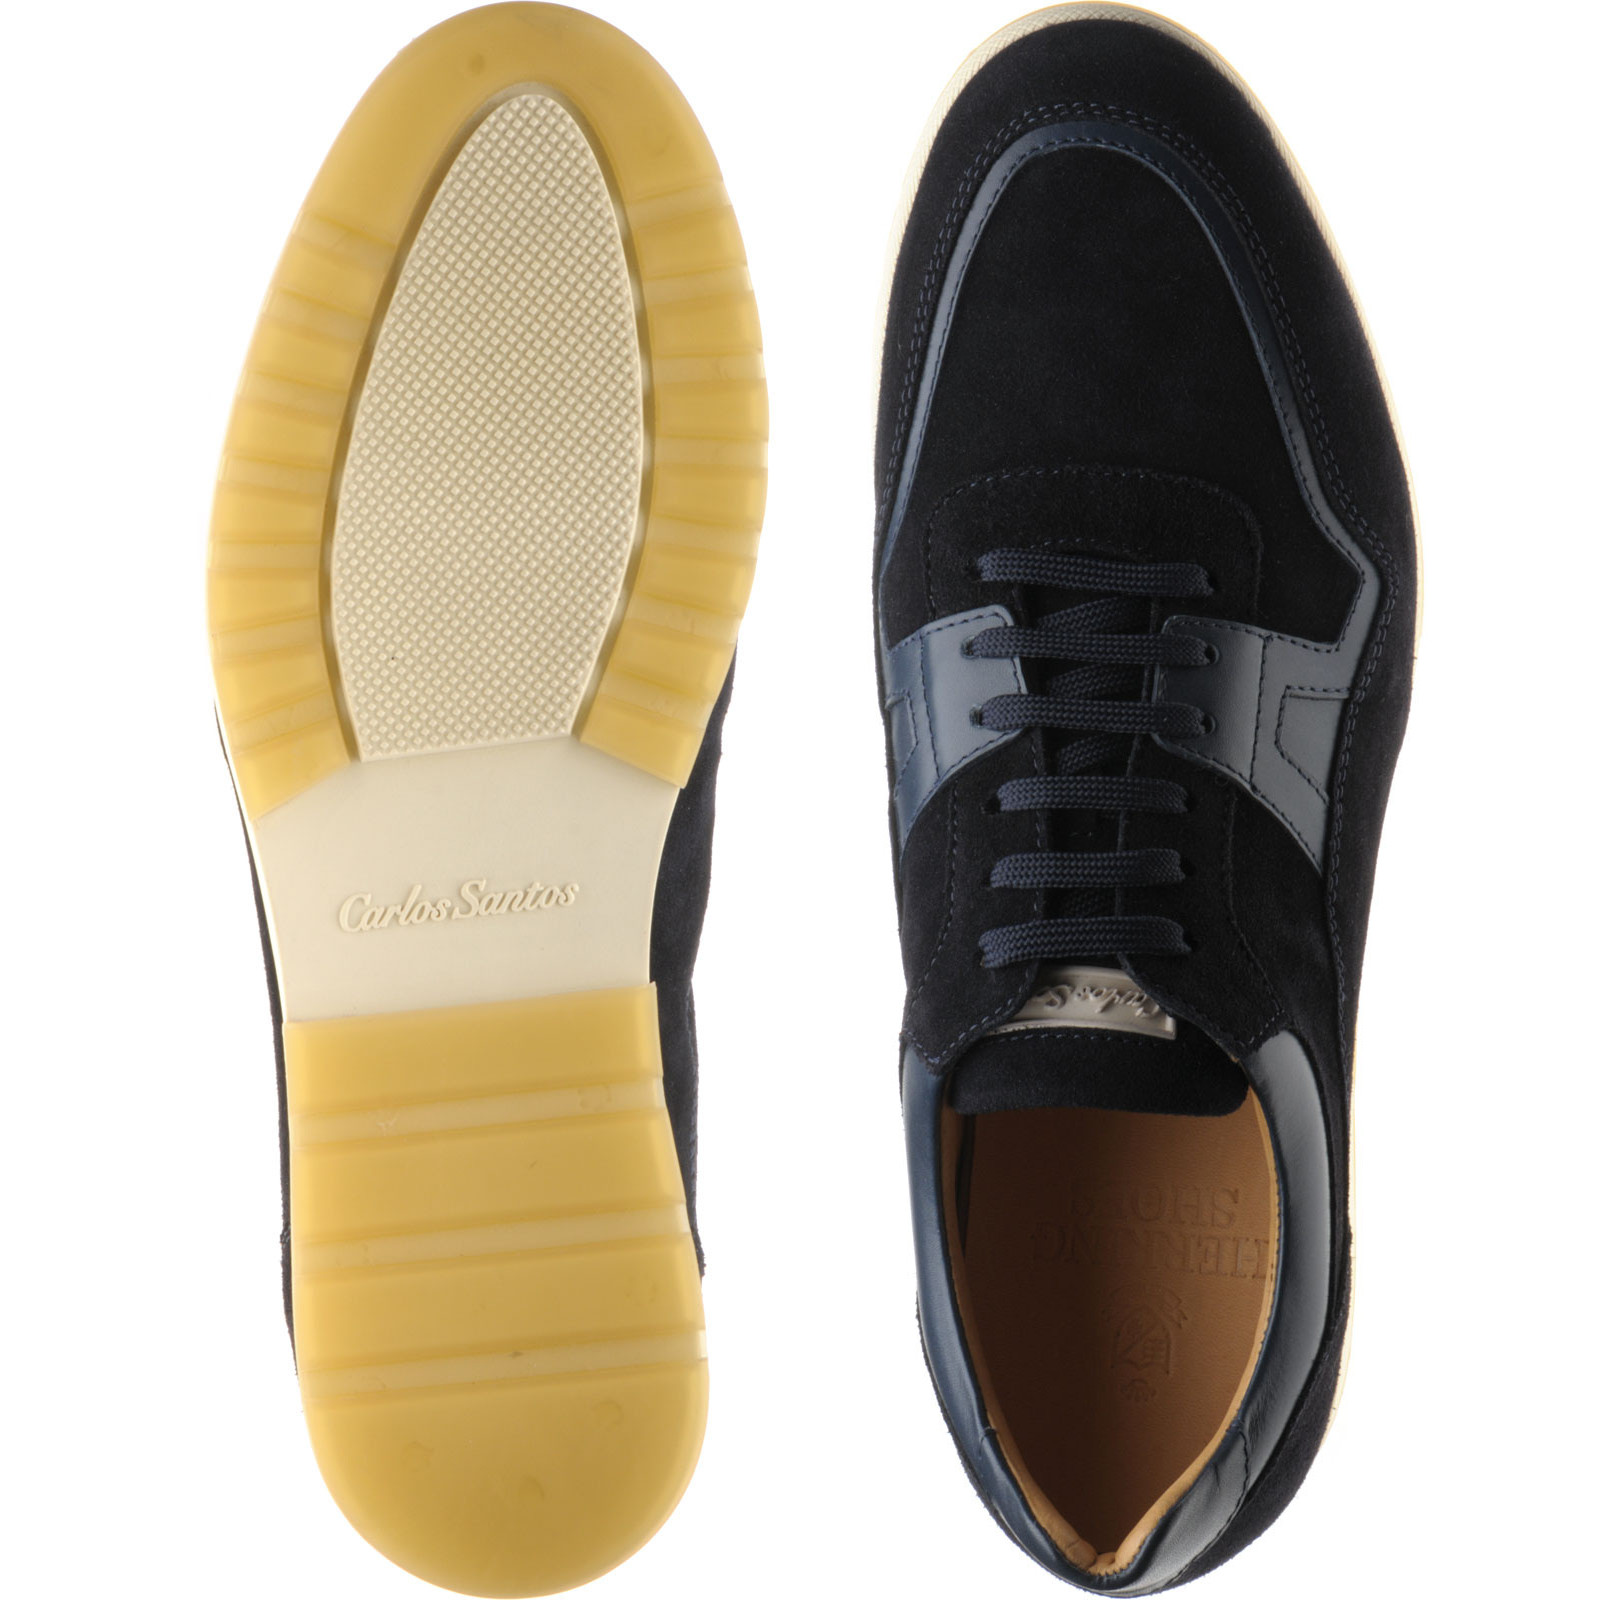 Herring shoes | Herring Classic | Dunsfold in Navy Calf and Navy Suede ...